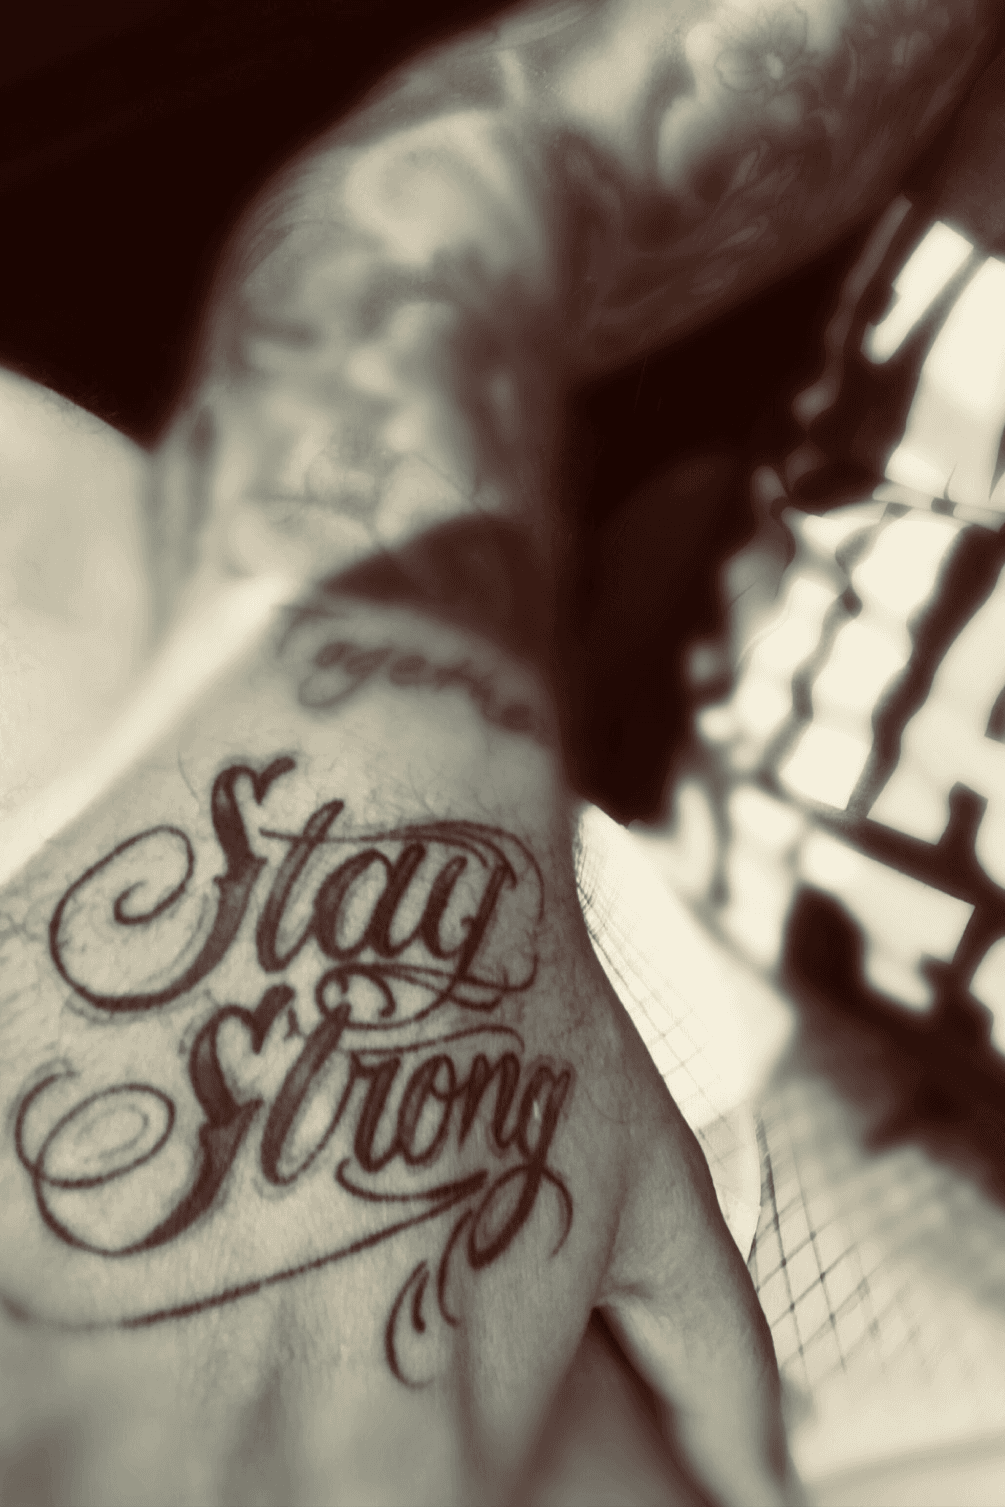 Stay Strong tattoo